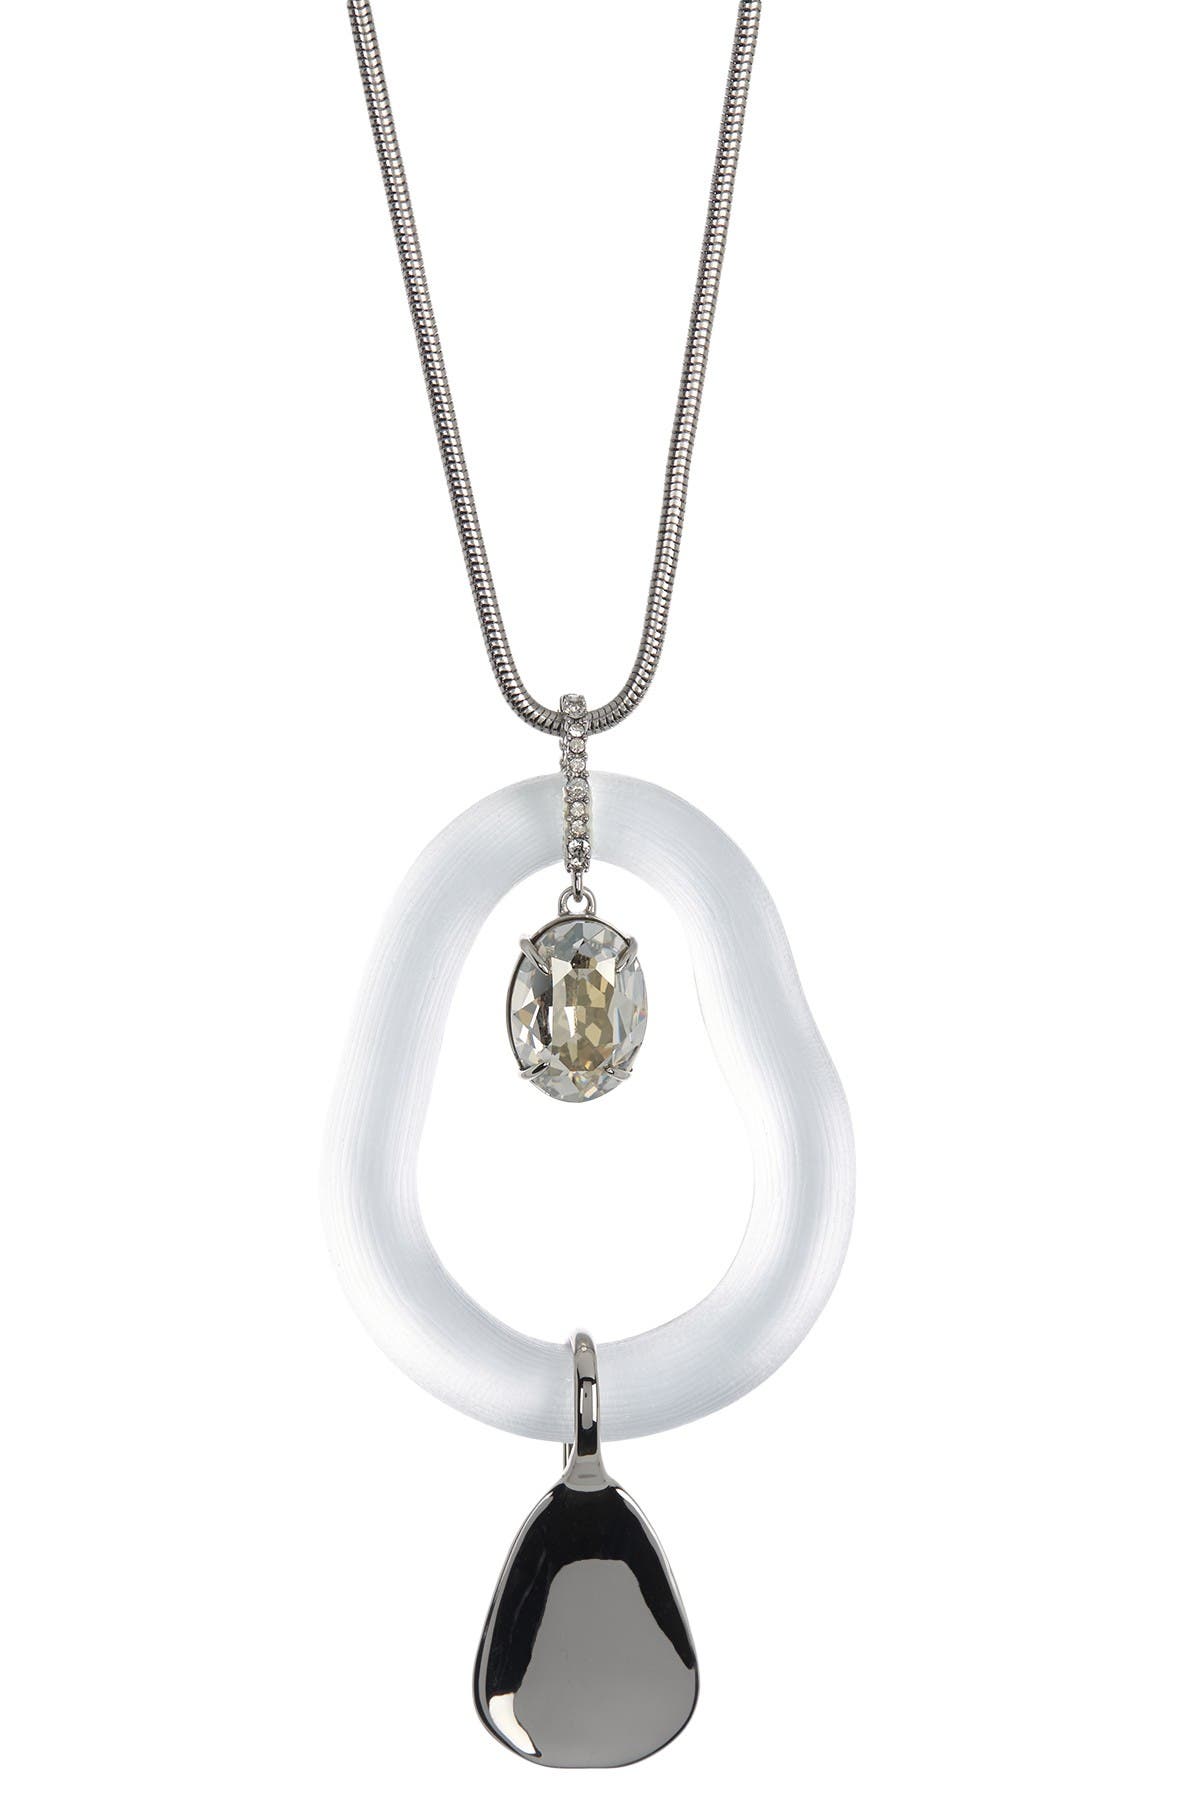 Alexis Bittar Organic Link Necklace W/ Stone & Lucite Drop Pendants In Silver